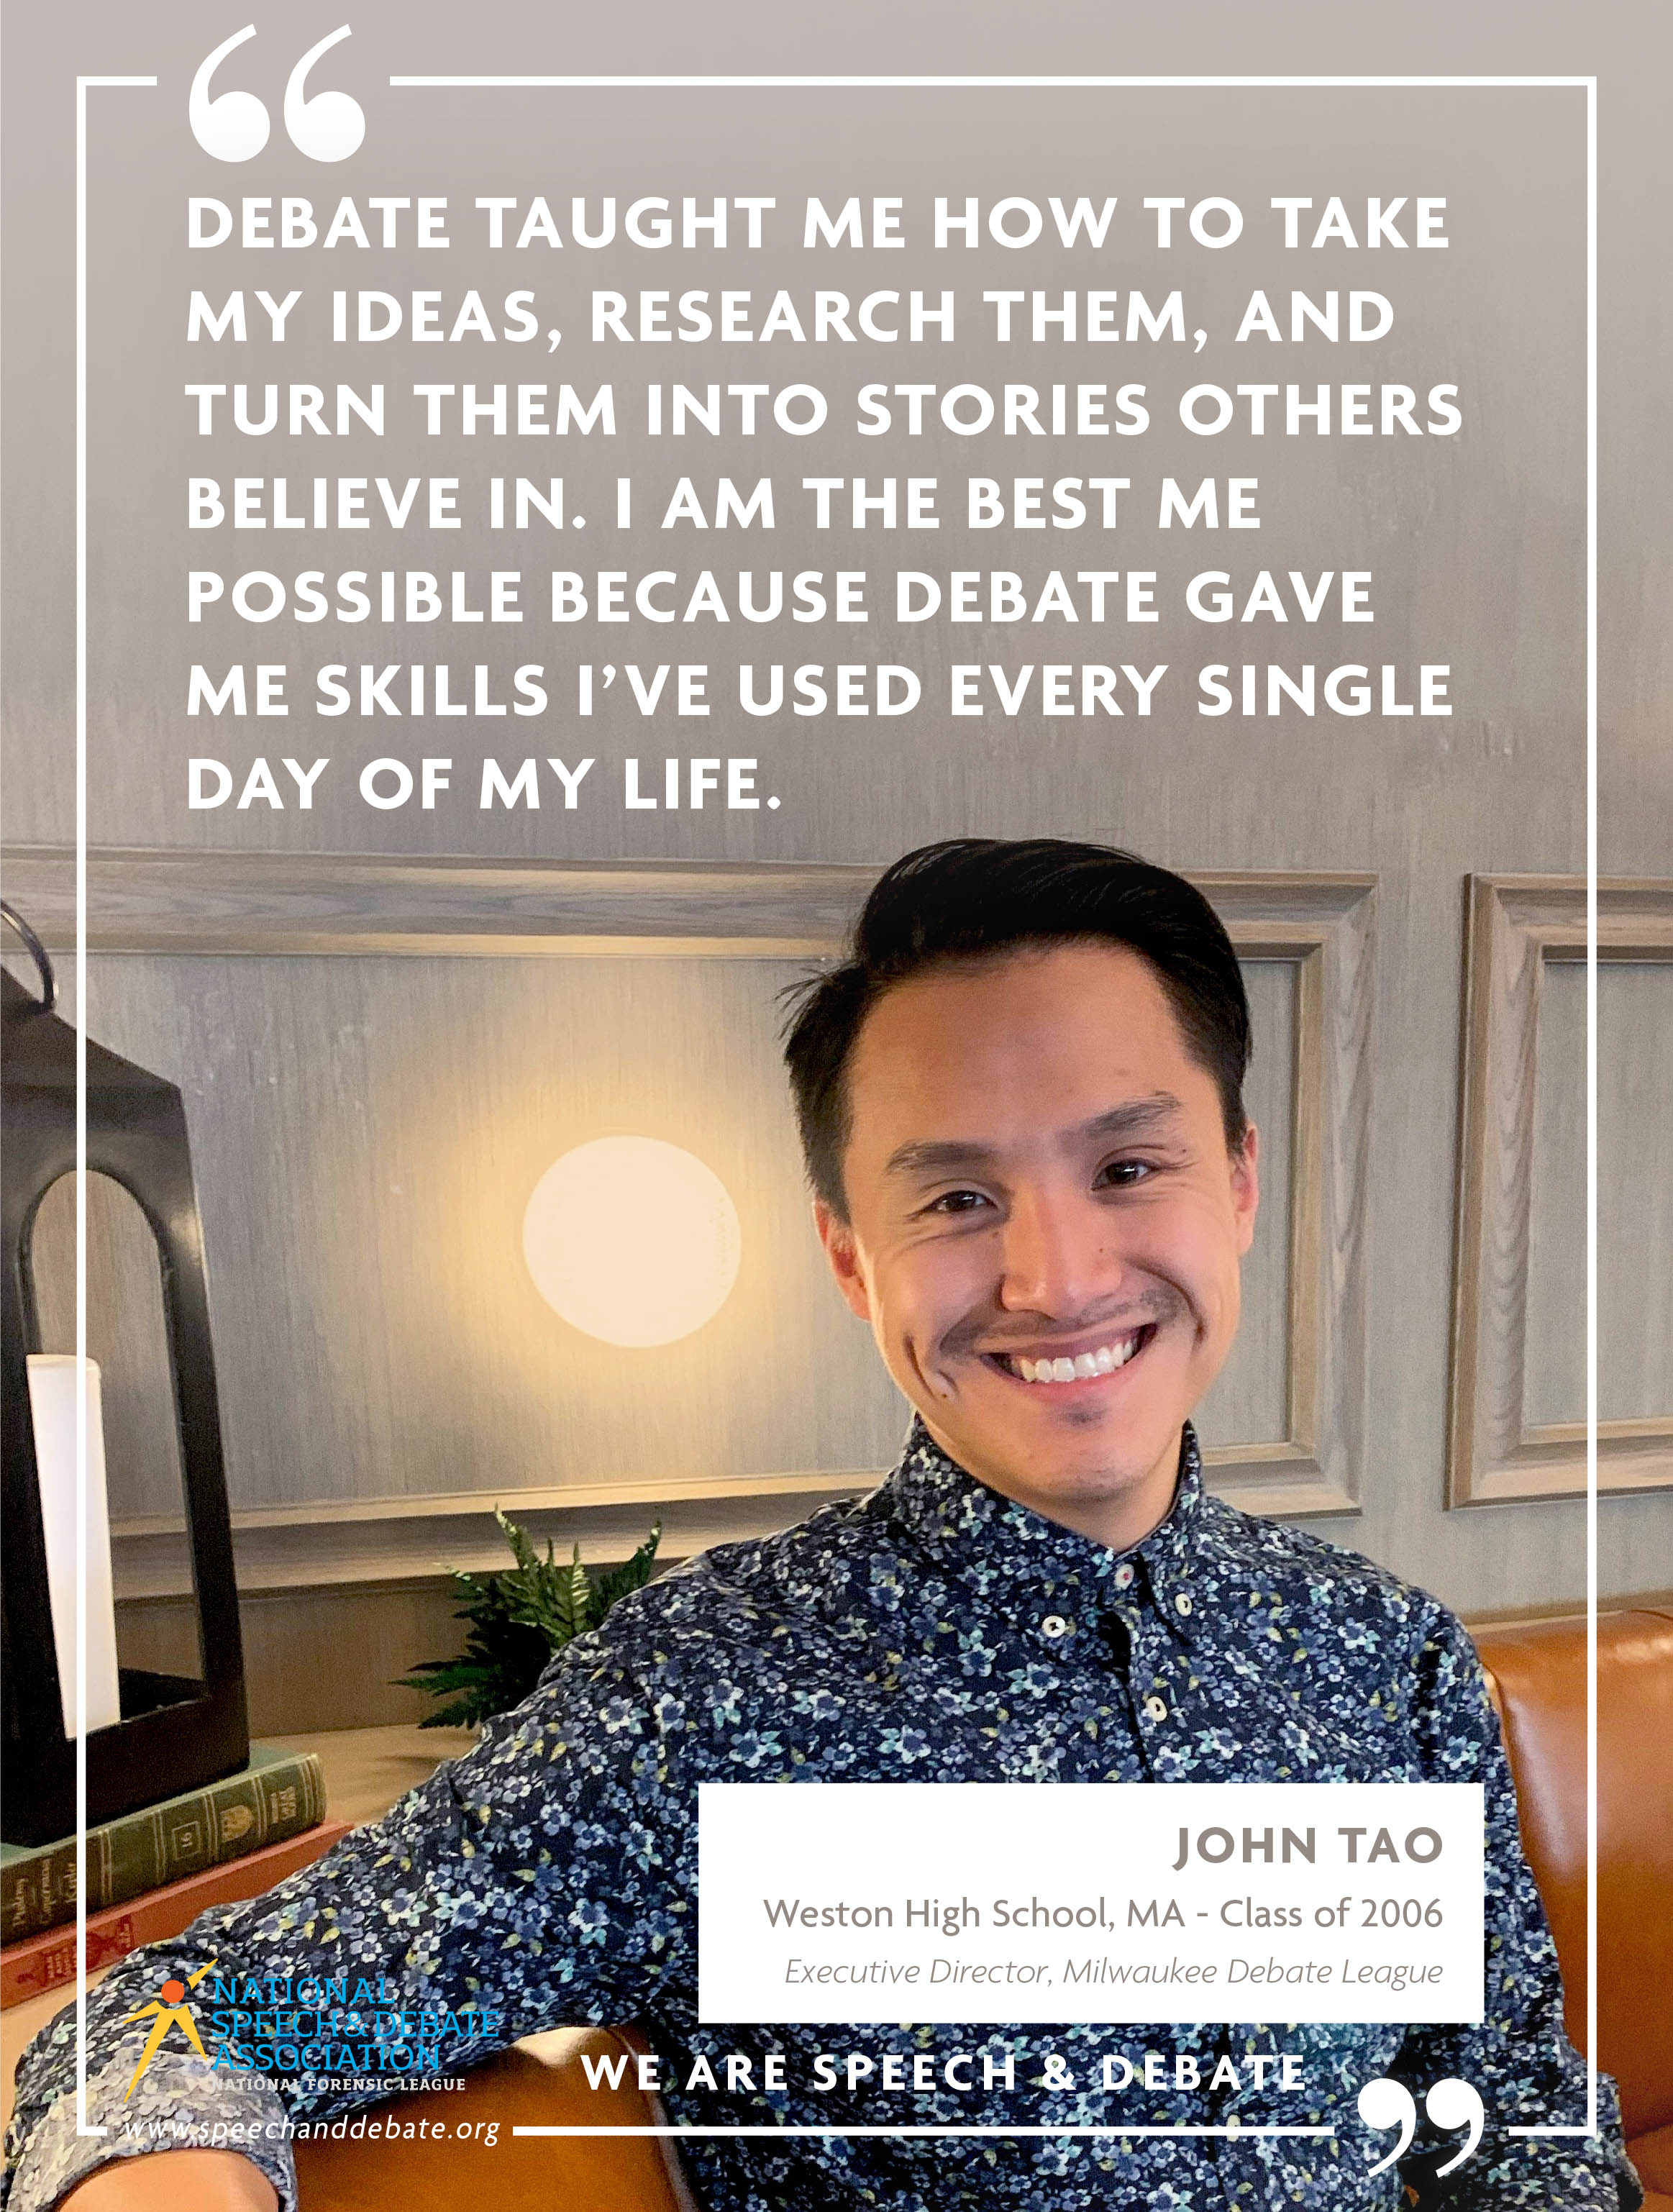 DEBATE TAUGHT ME HOW TO TAKE MY IDEAS, RESEARCH THEM, AND TURN THEM INTO STORIES OTHERS BELIEVE IN. I AM THE BEST ME POSSIBLE BECAUSE DEBATE GAVE ME SKILLS I’VE USED EVERY SINGLE DAY OF MY LIFE. - John Tao